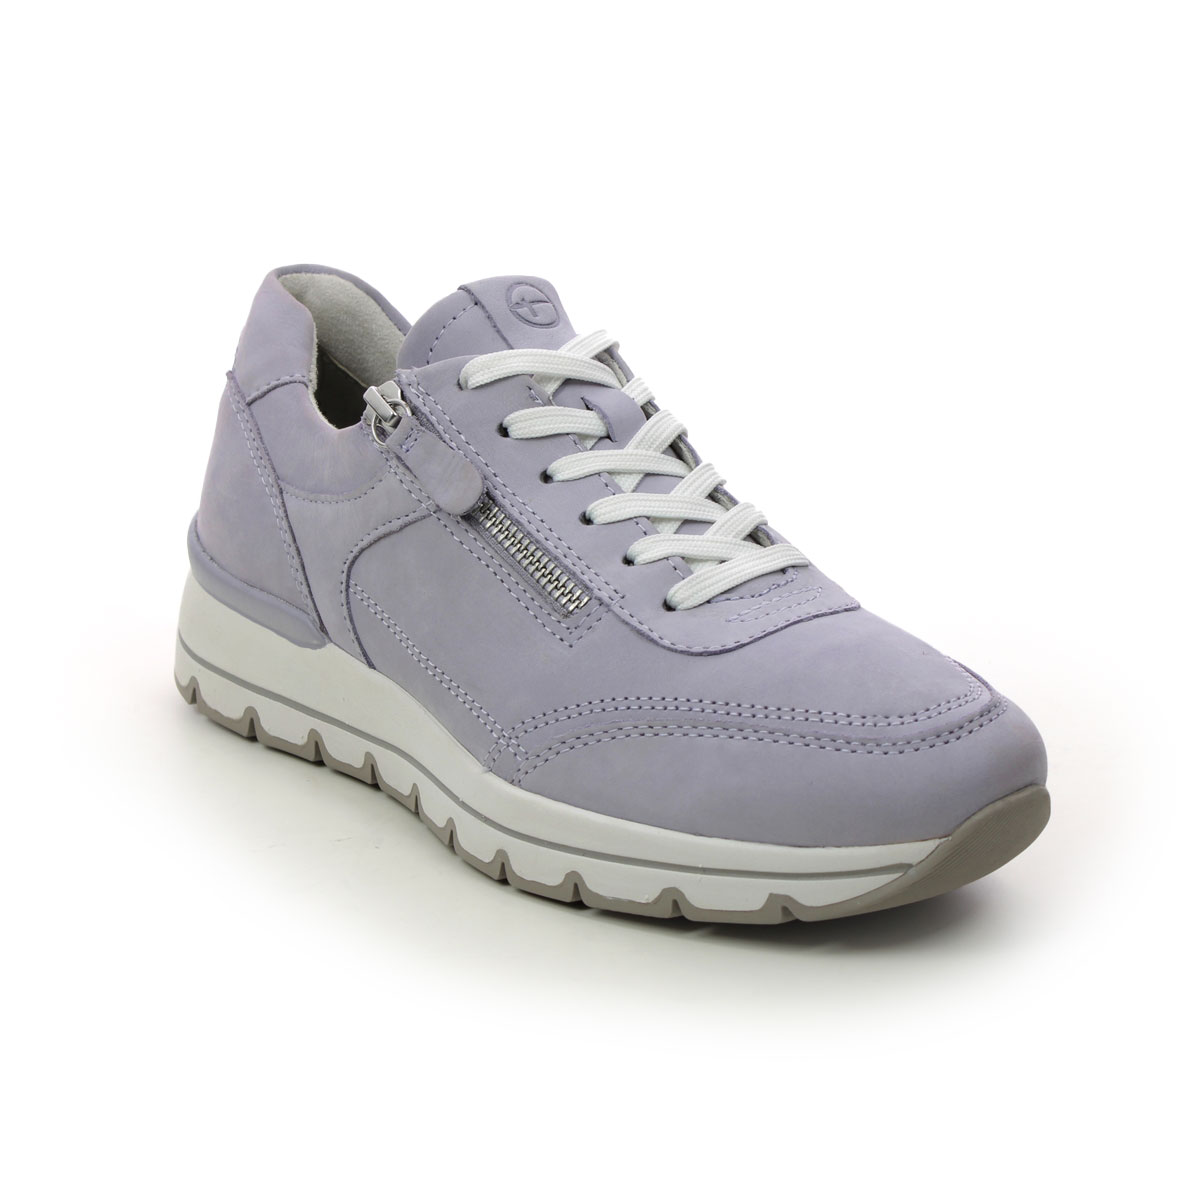 Tamaris Vinnie Zip Lilac Womens trainers 23725-30-543 in a Plain Leather in Size 39